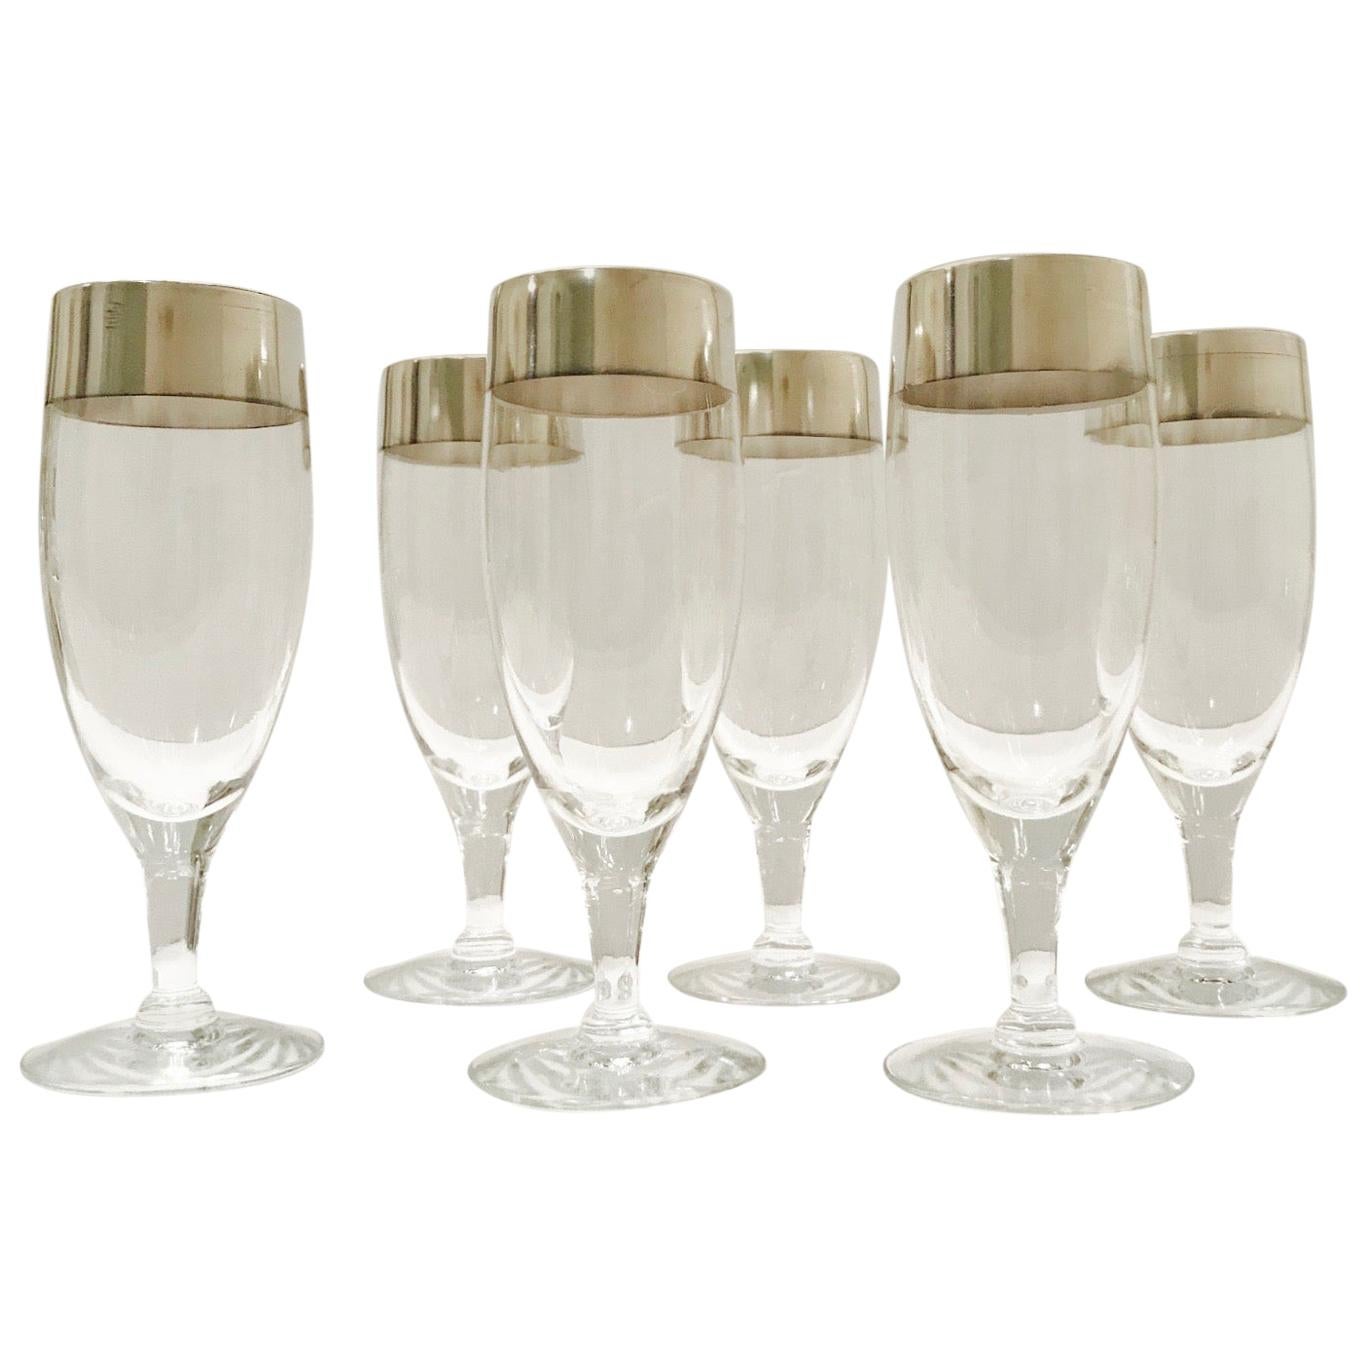 Set of Mid-Century Modern stemware glasses designed by Dorothy Thorpe. The rare blown champagne glasses feature short stems with the iconic sterling silver rims for which Thorpe is recognized and highly sought after. These make an excellent and